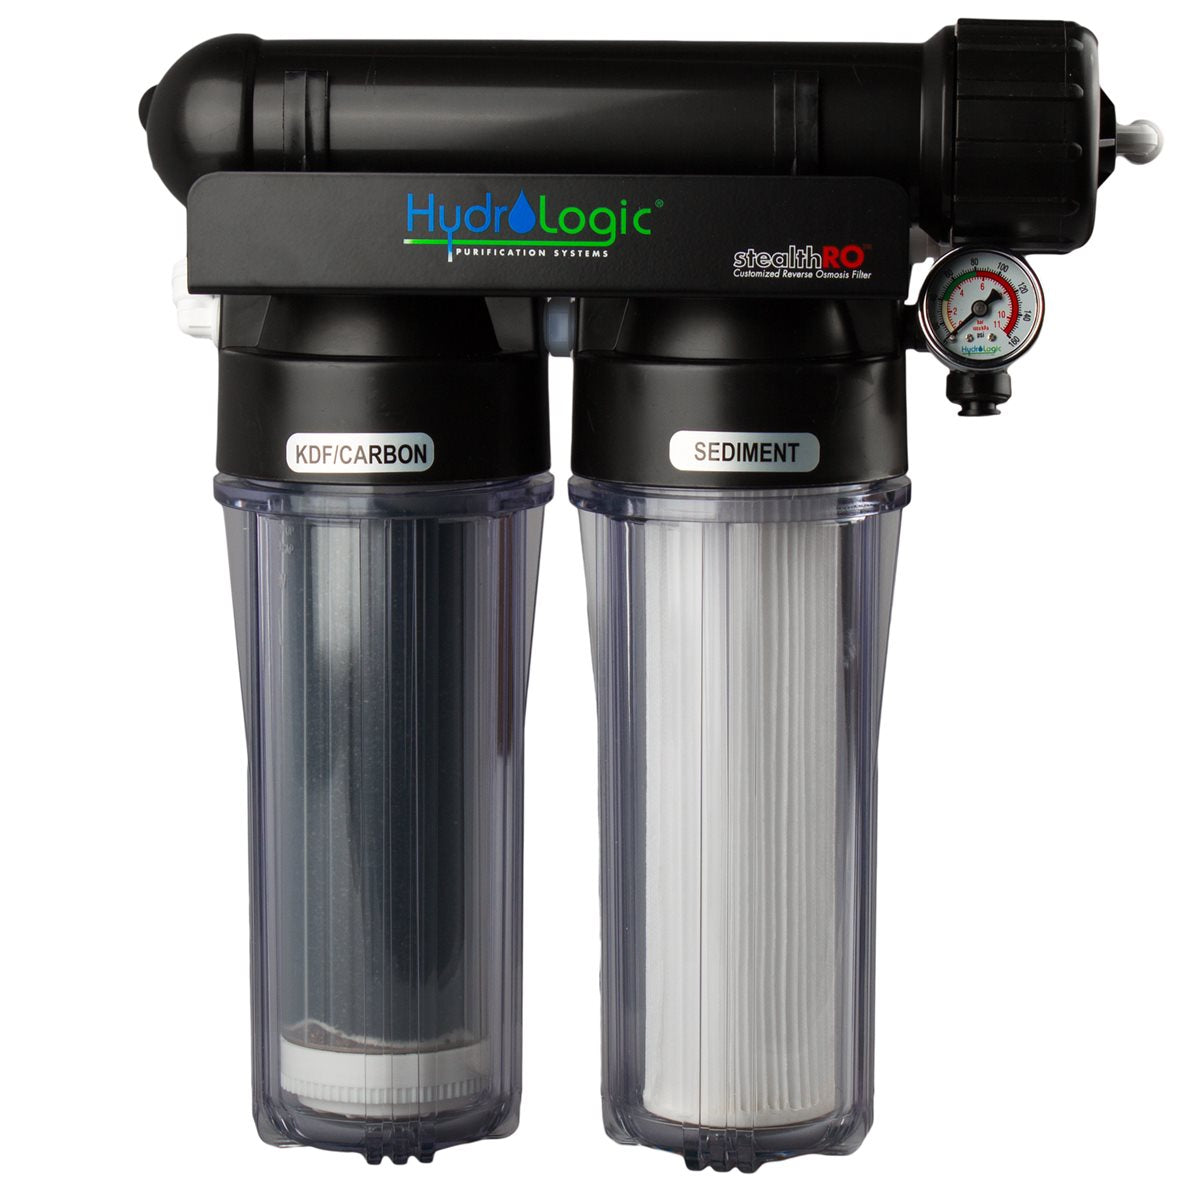 HydroLogic StealthRO150 with KDF and Carbon Filter